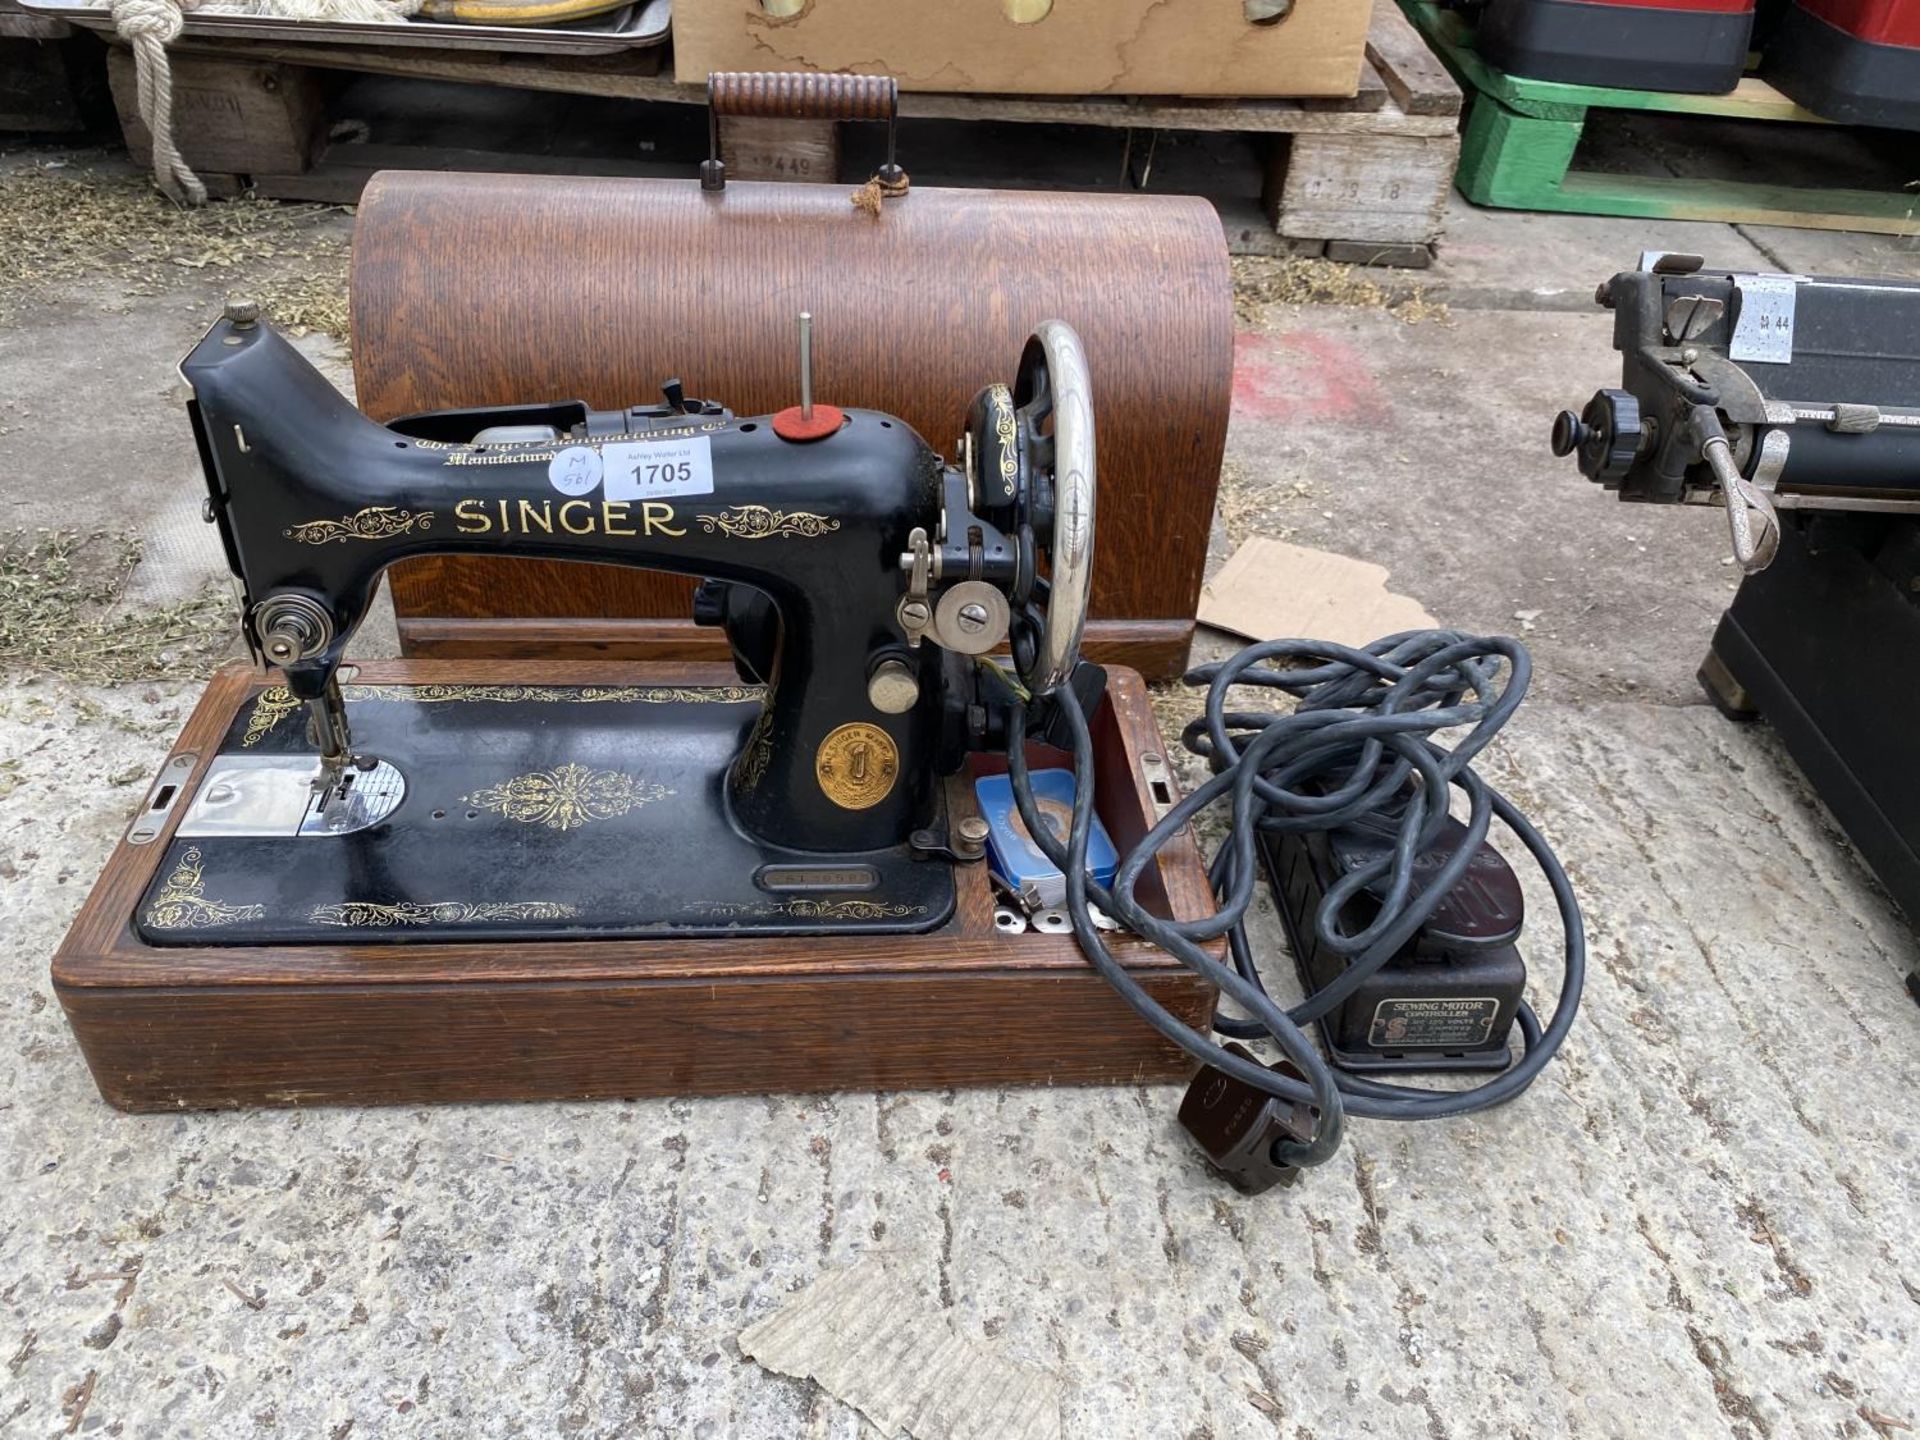 A VINTAGE SINGER ELECTRIC SEWING MACHINE